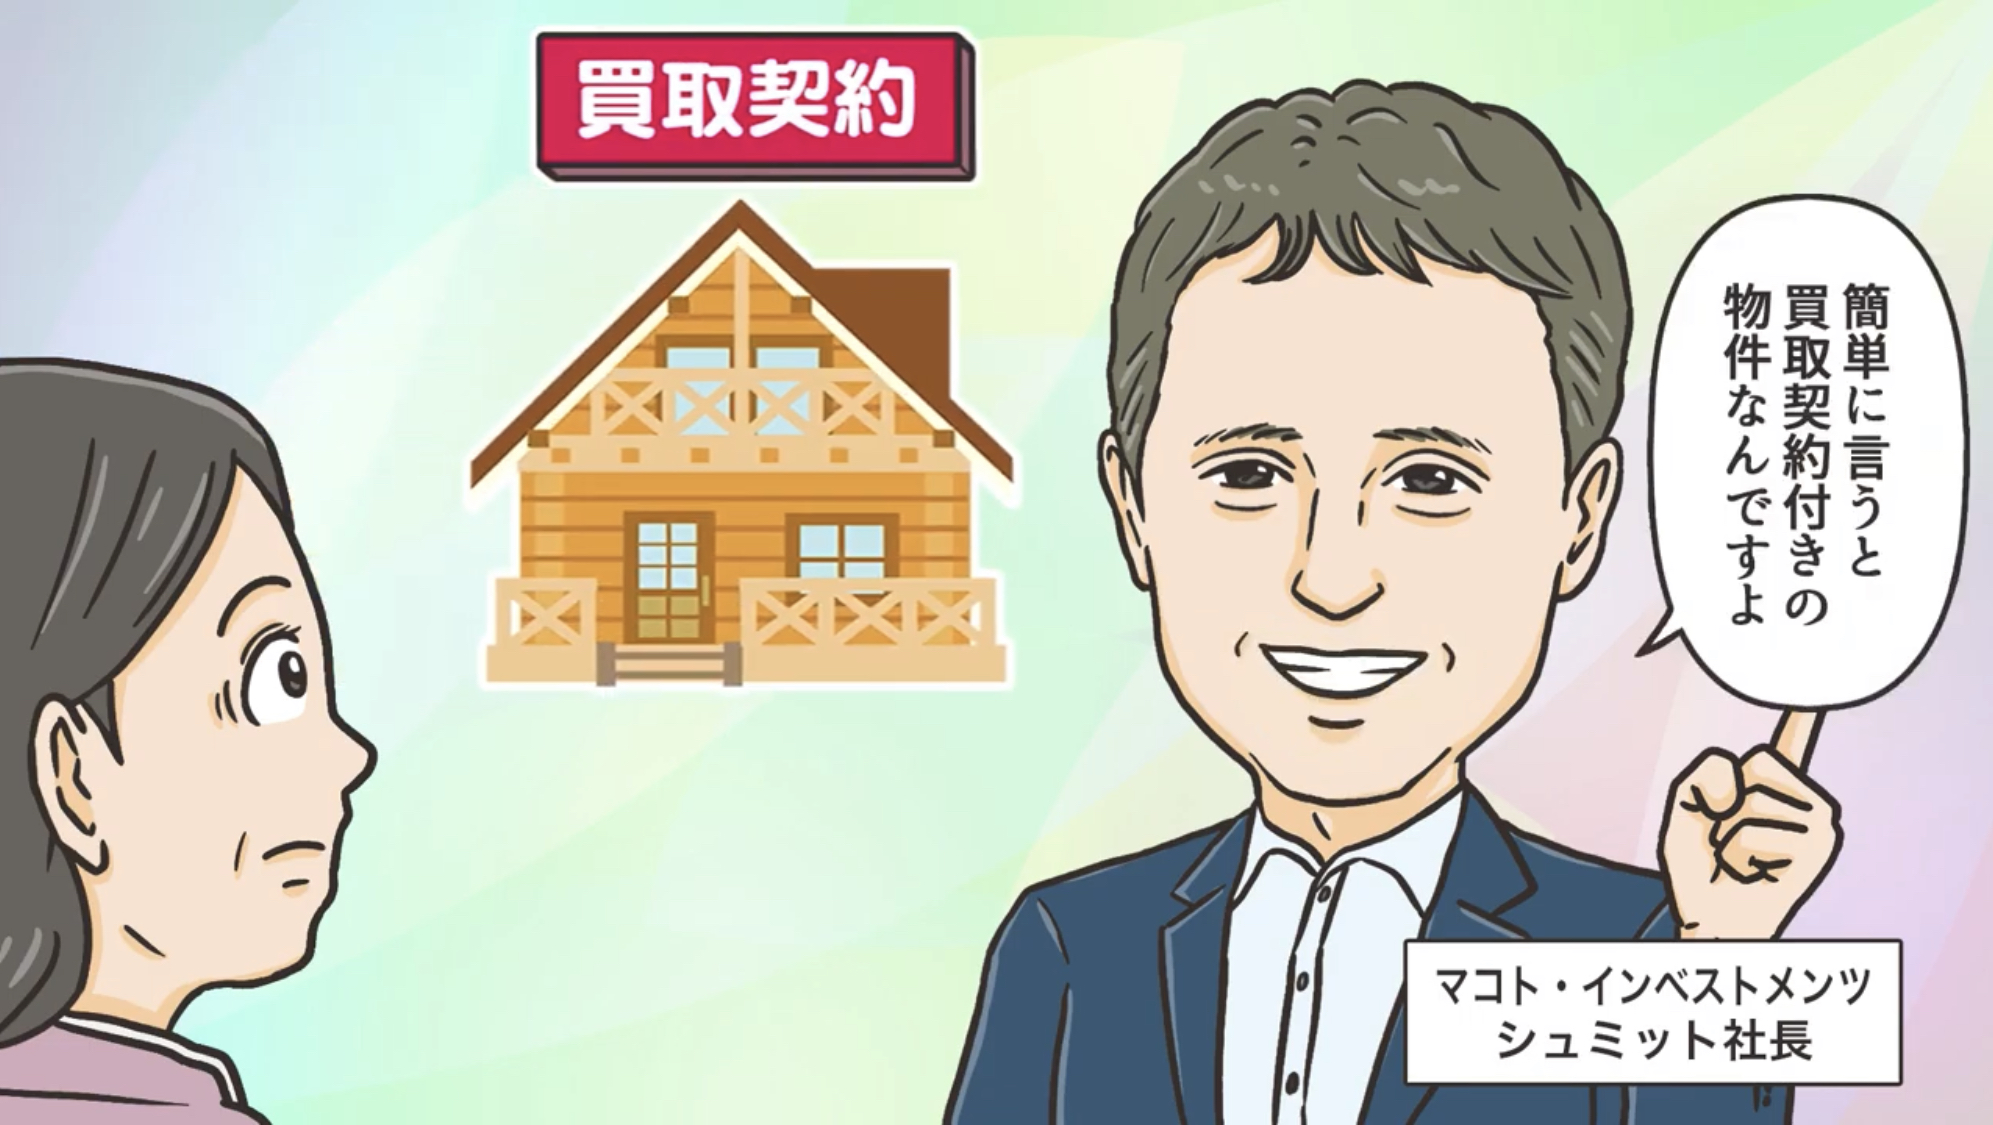 manga video micelle work example 3 (consultant company) Makoto Investments Co., Ltd. North American real estate edition